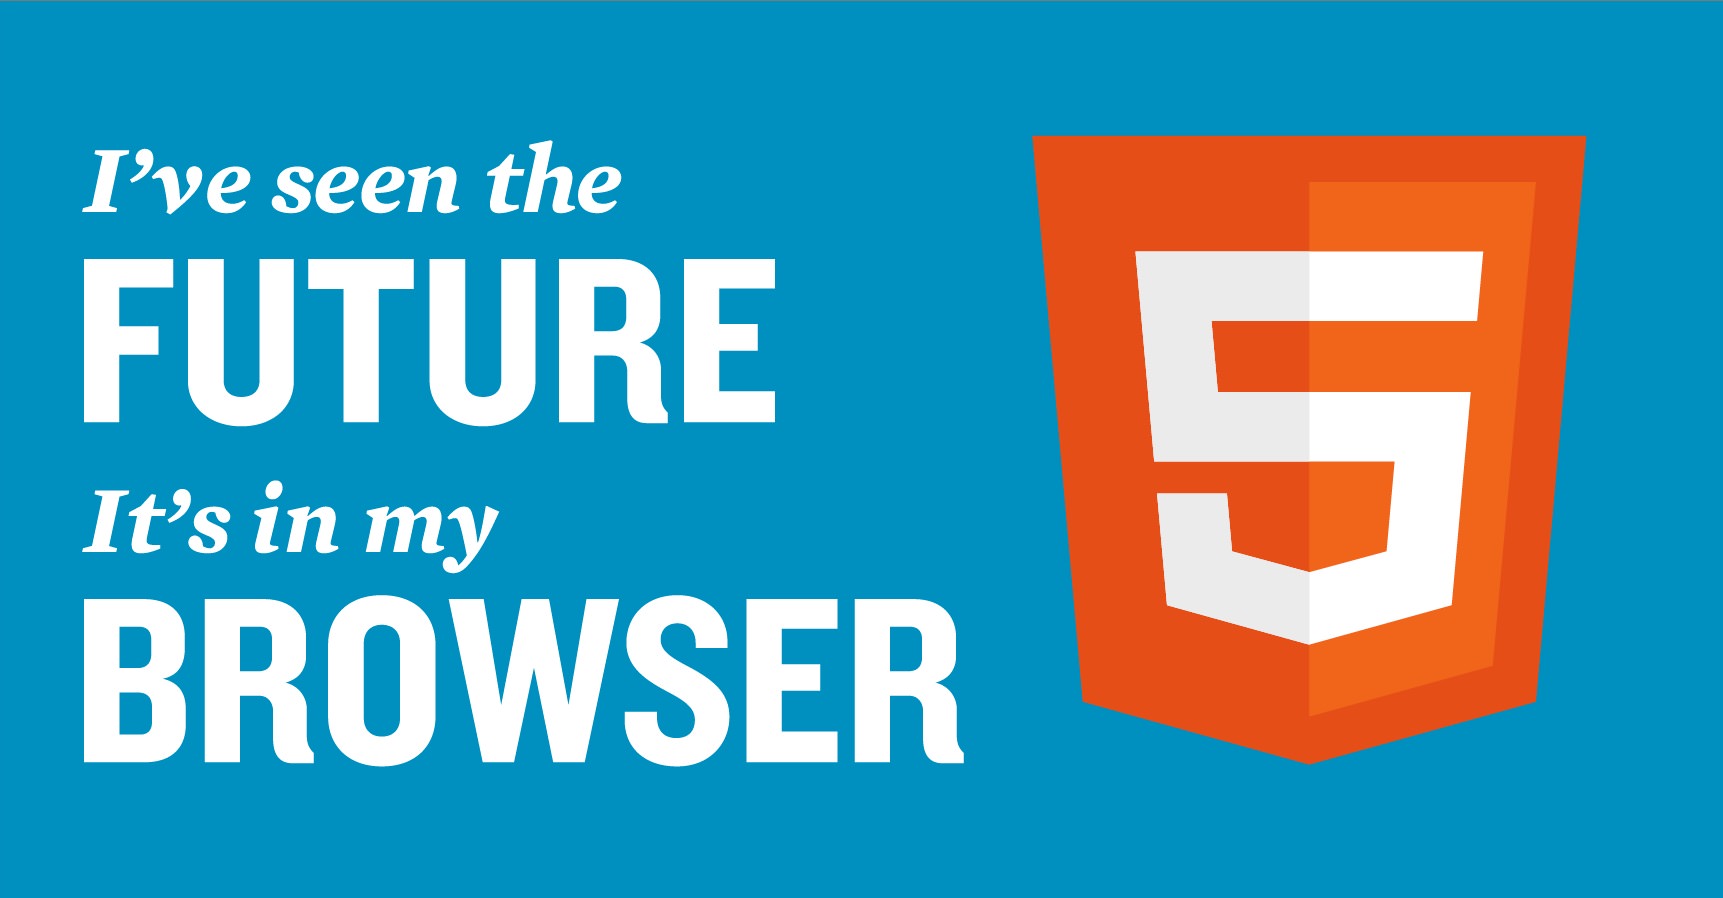 HTML5 - I've seen the FUTURE. It's in my BROWSER.